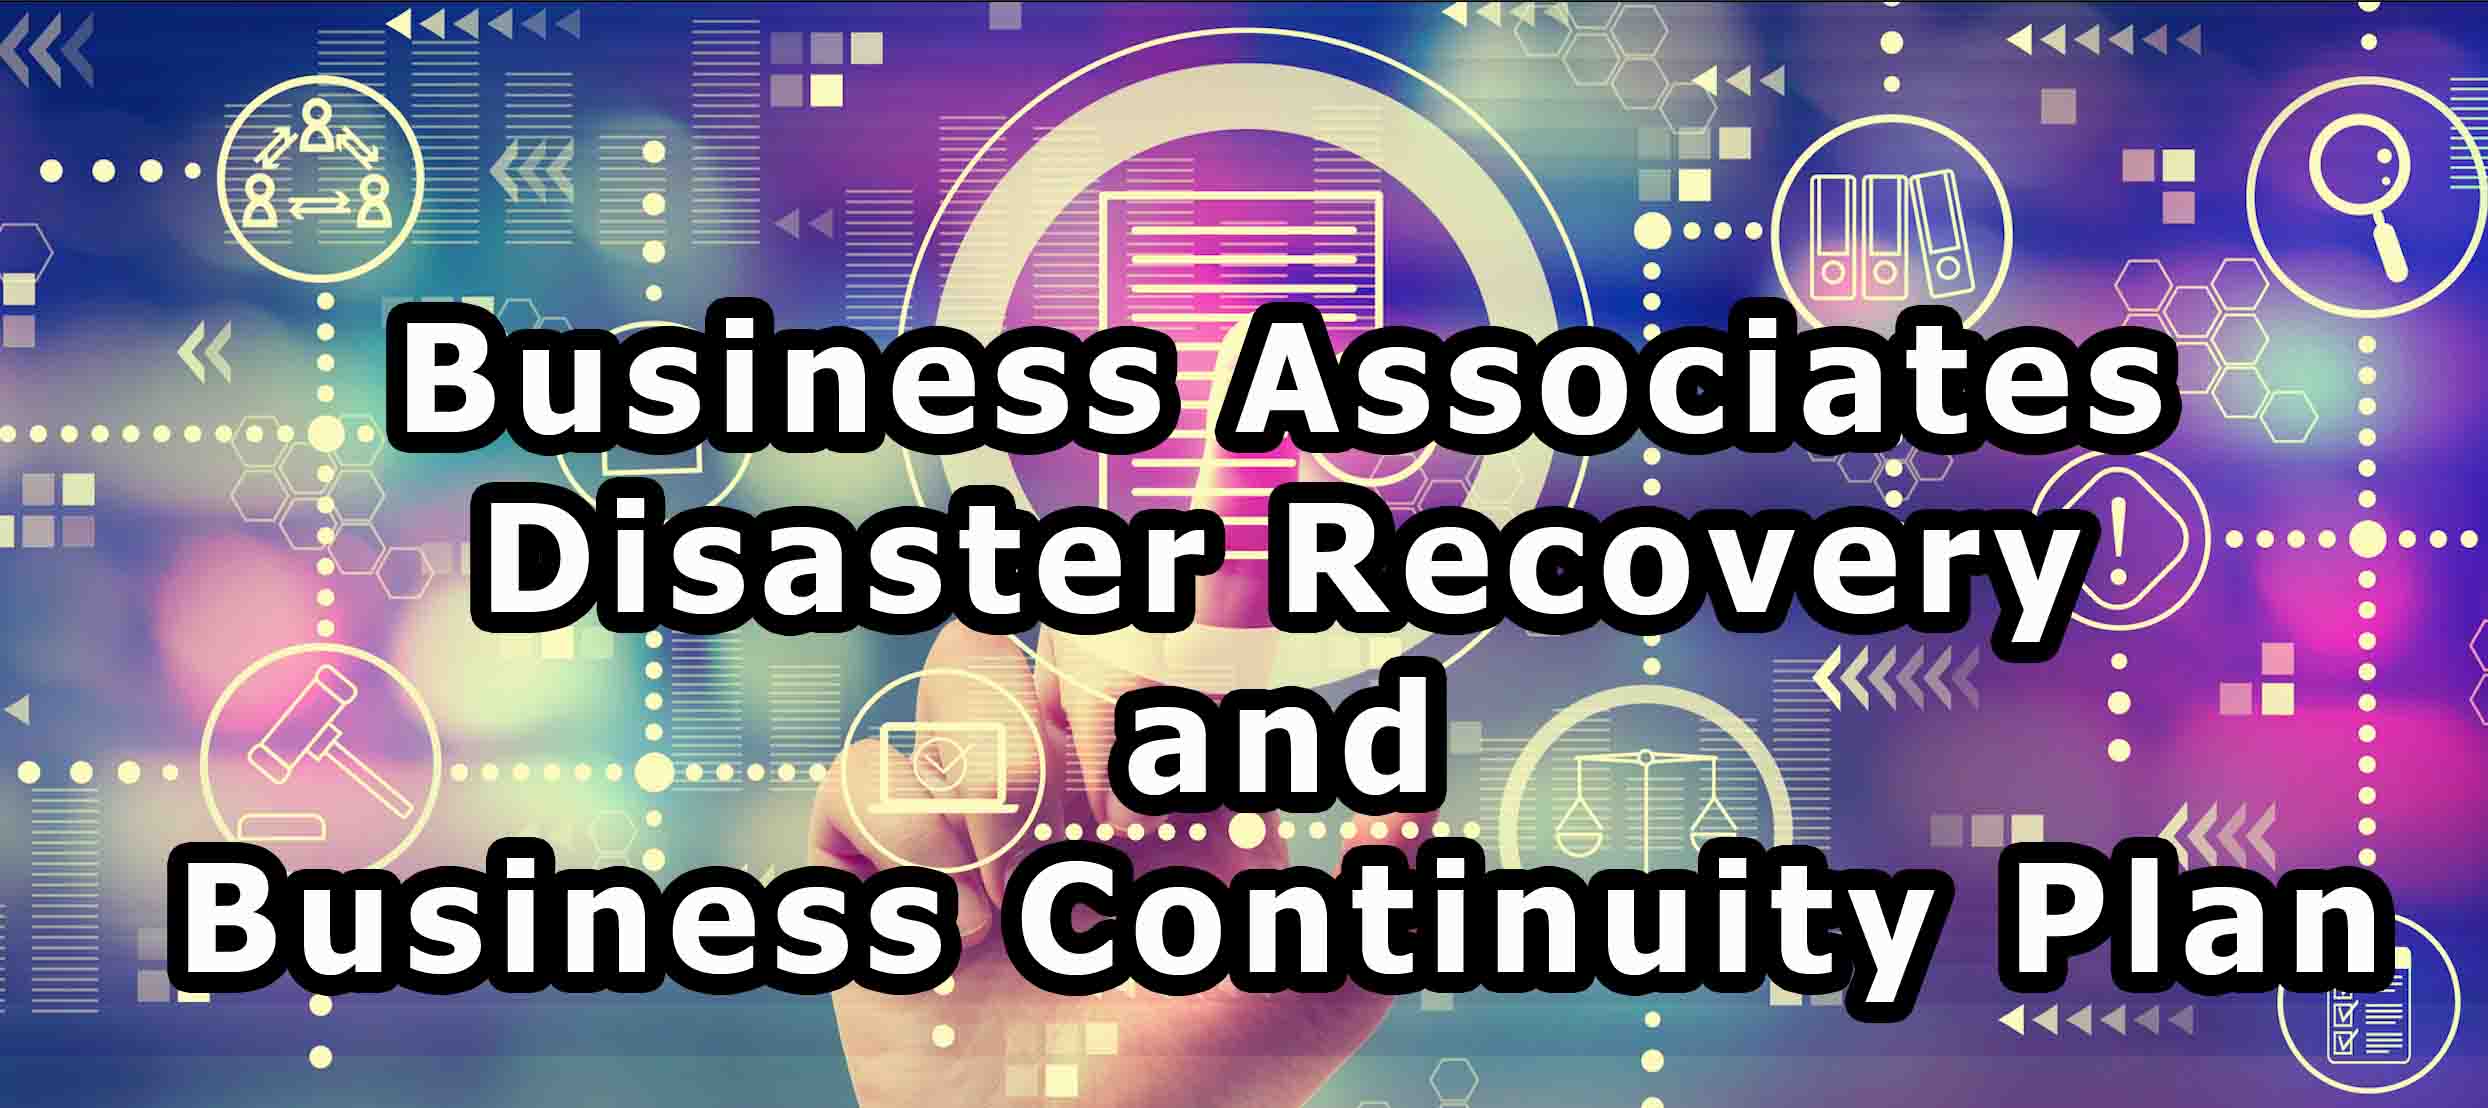 Business Associates Disaster Recovery and Business Continuity Plan